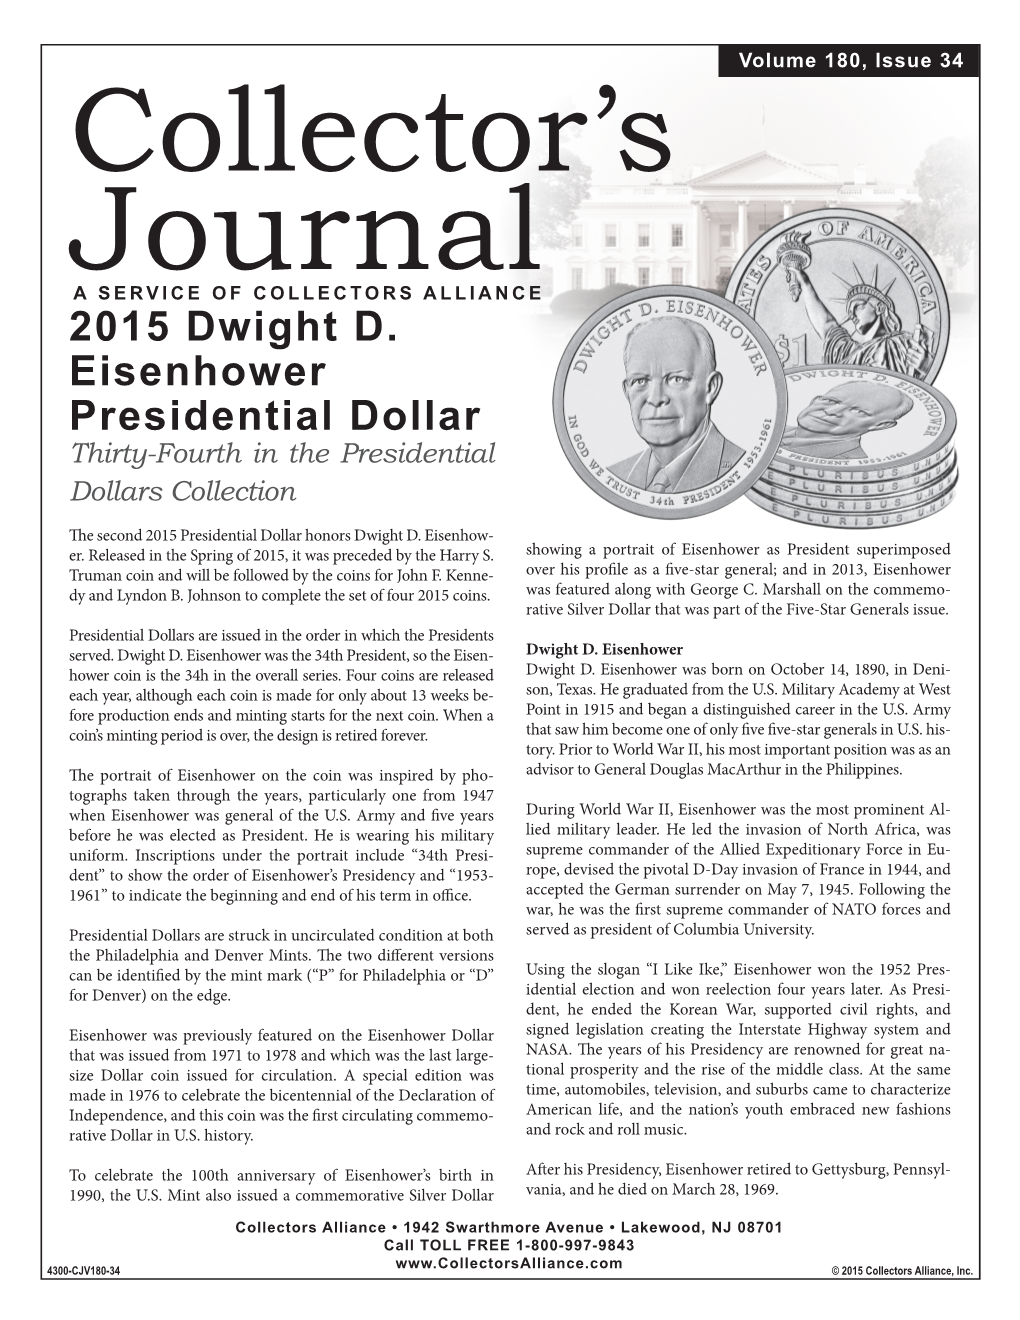 2015 Dwight D. Eisenhower Presidential Dollar Thirty-Fourth in the Presidential Dollars Collection